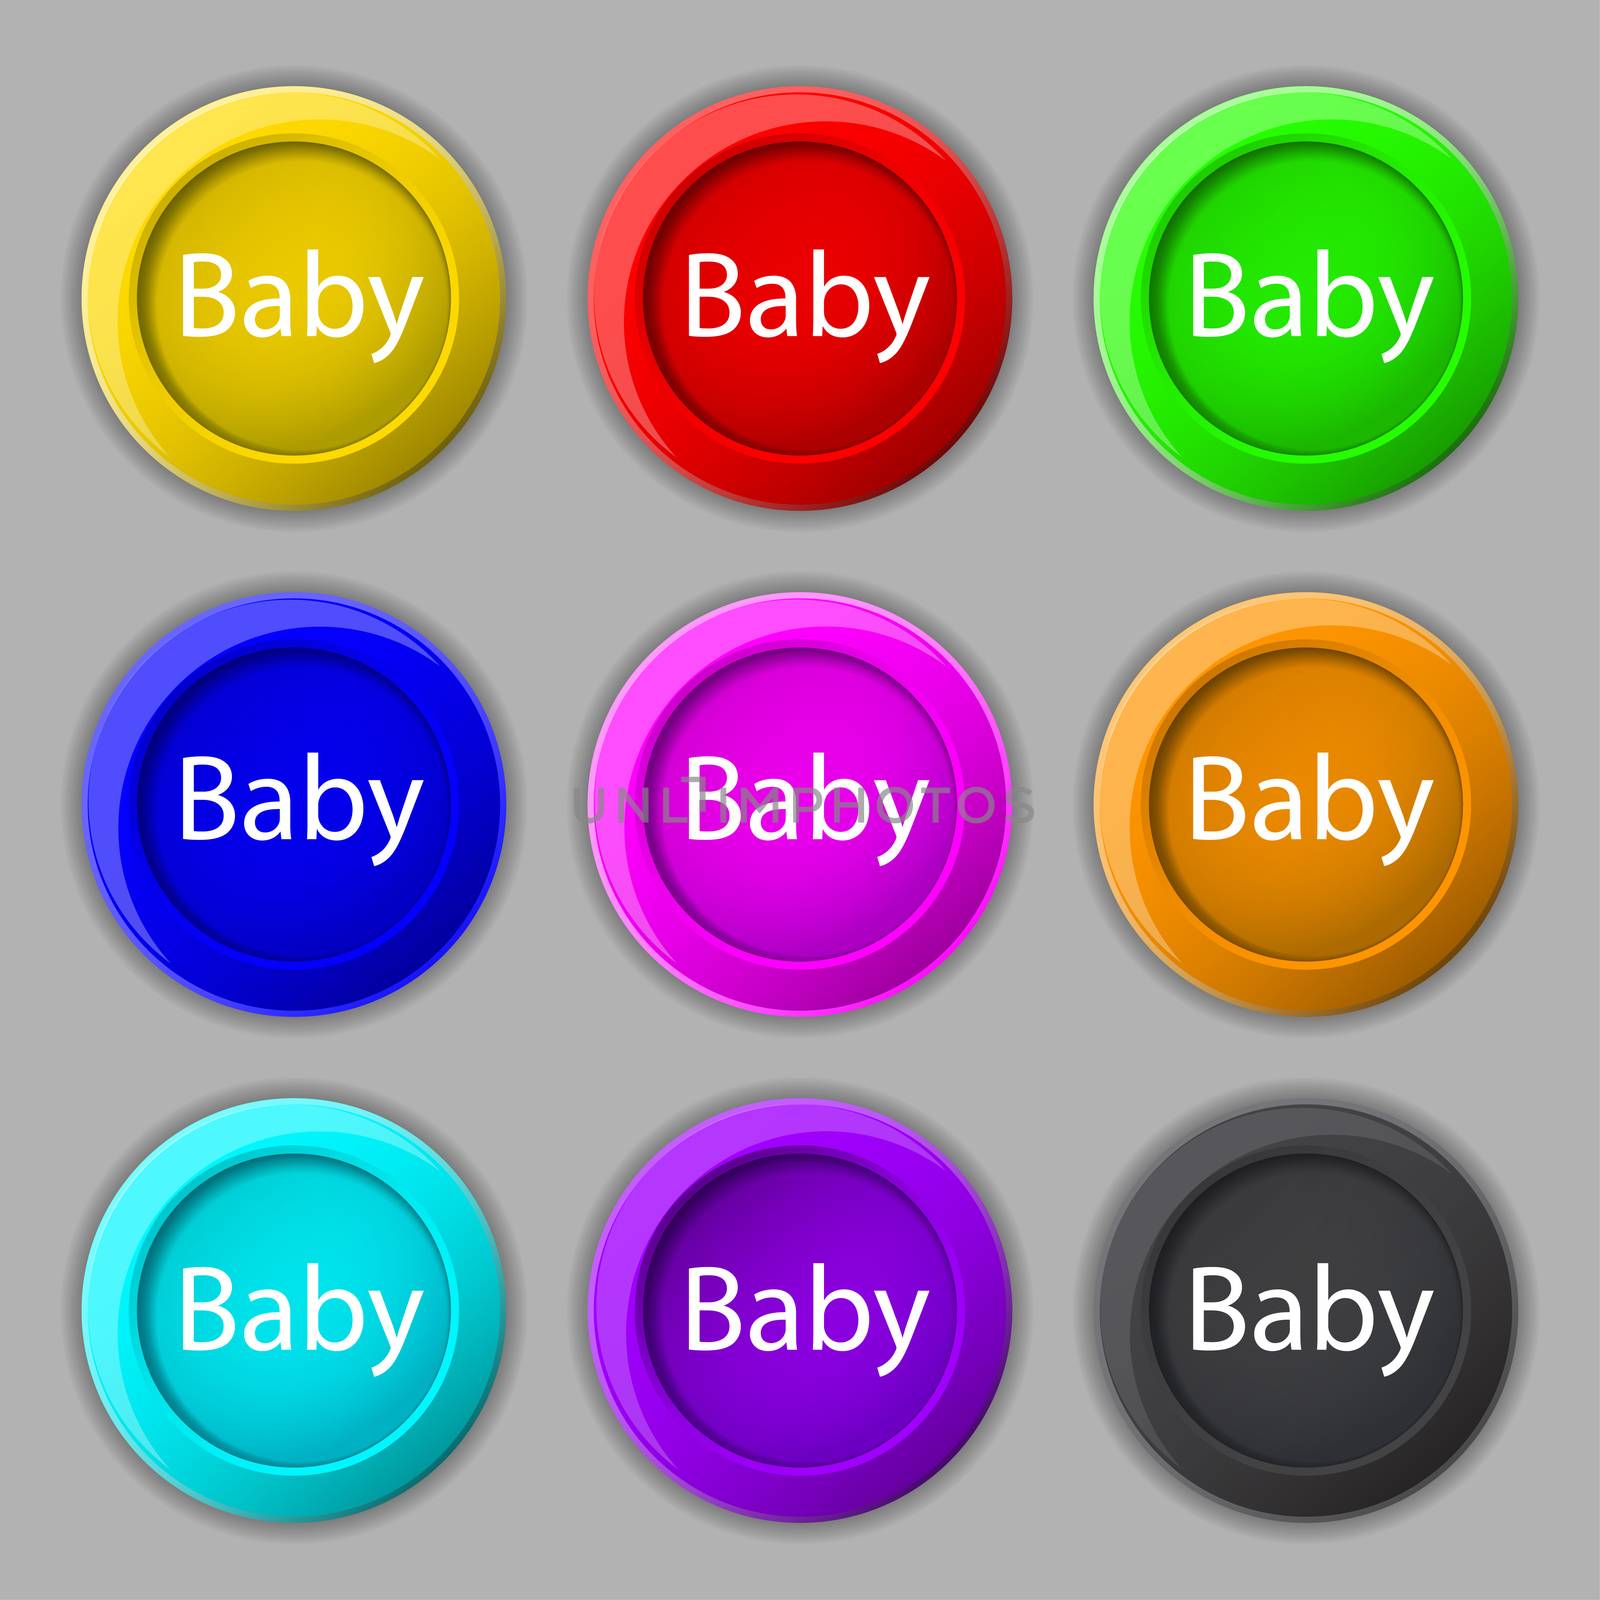 Baby on board sign icon. Infant in car caution symbol. Baby pacifier nipple. Set of colored buttons. illustration